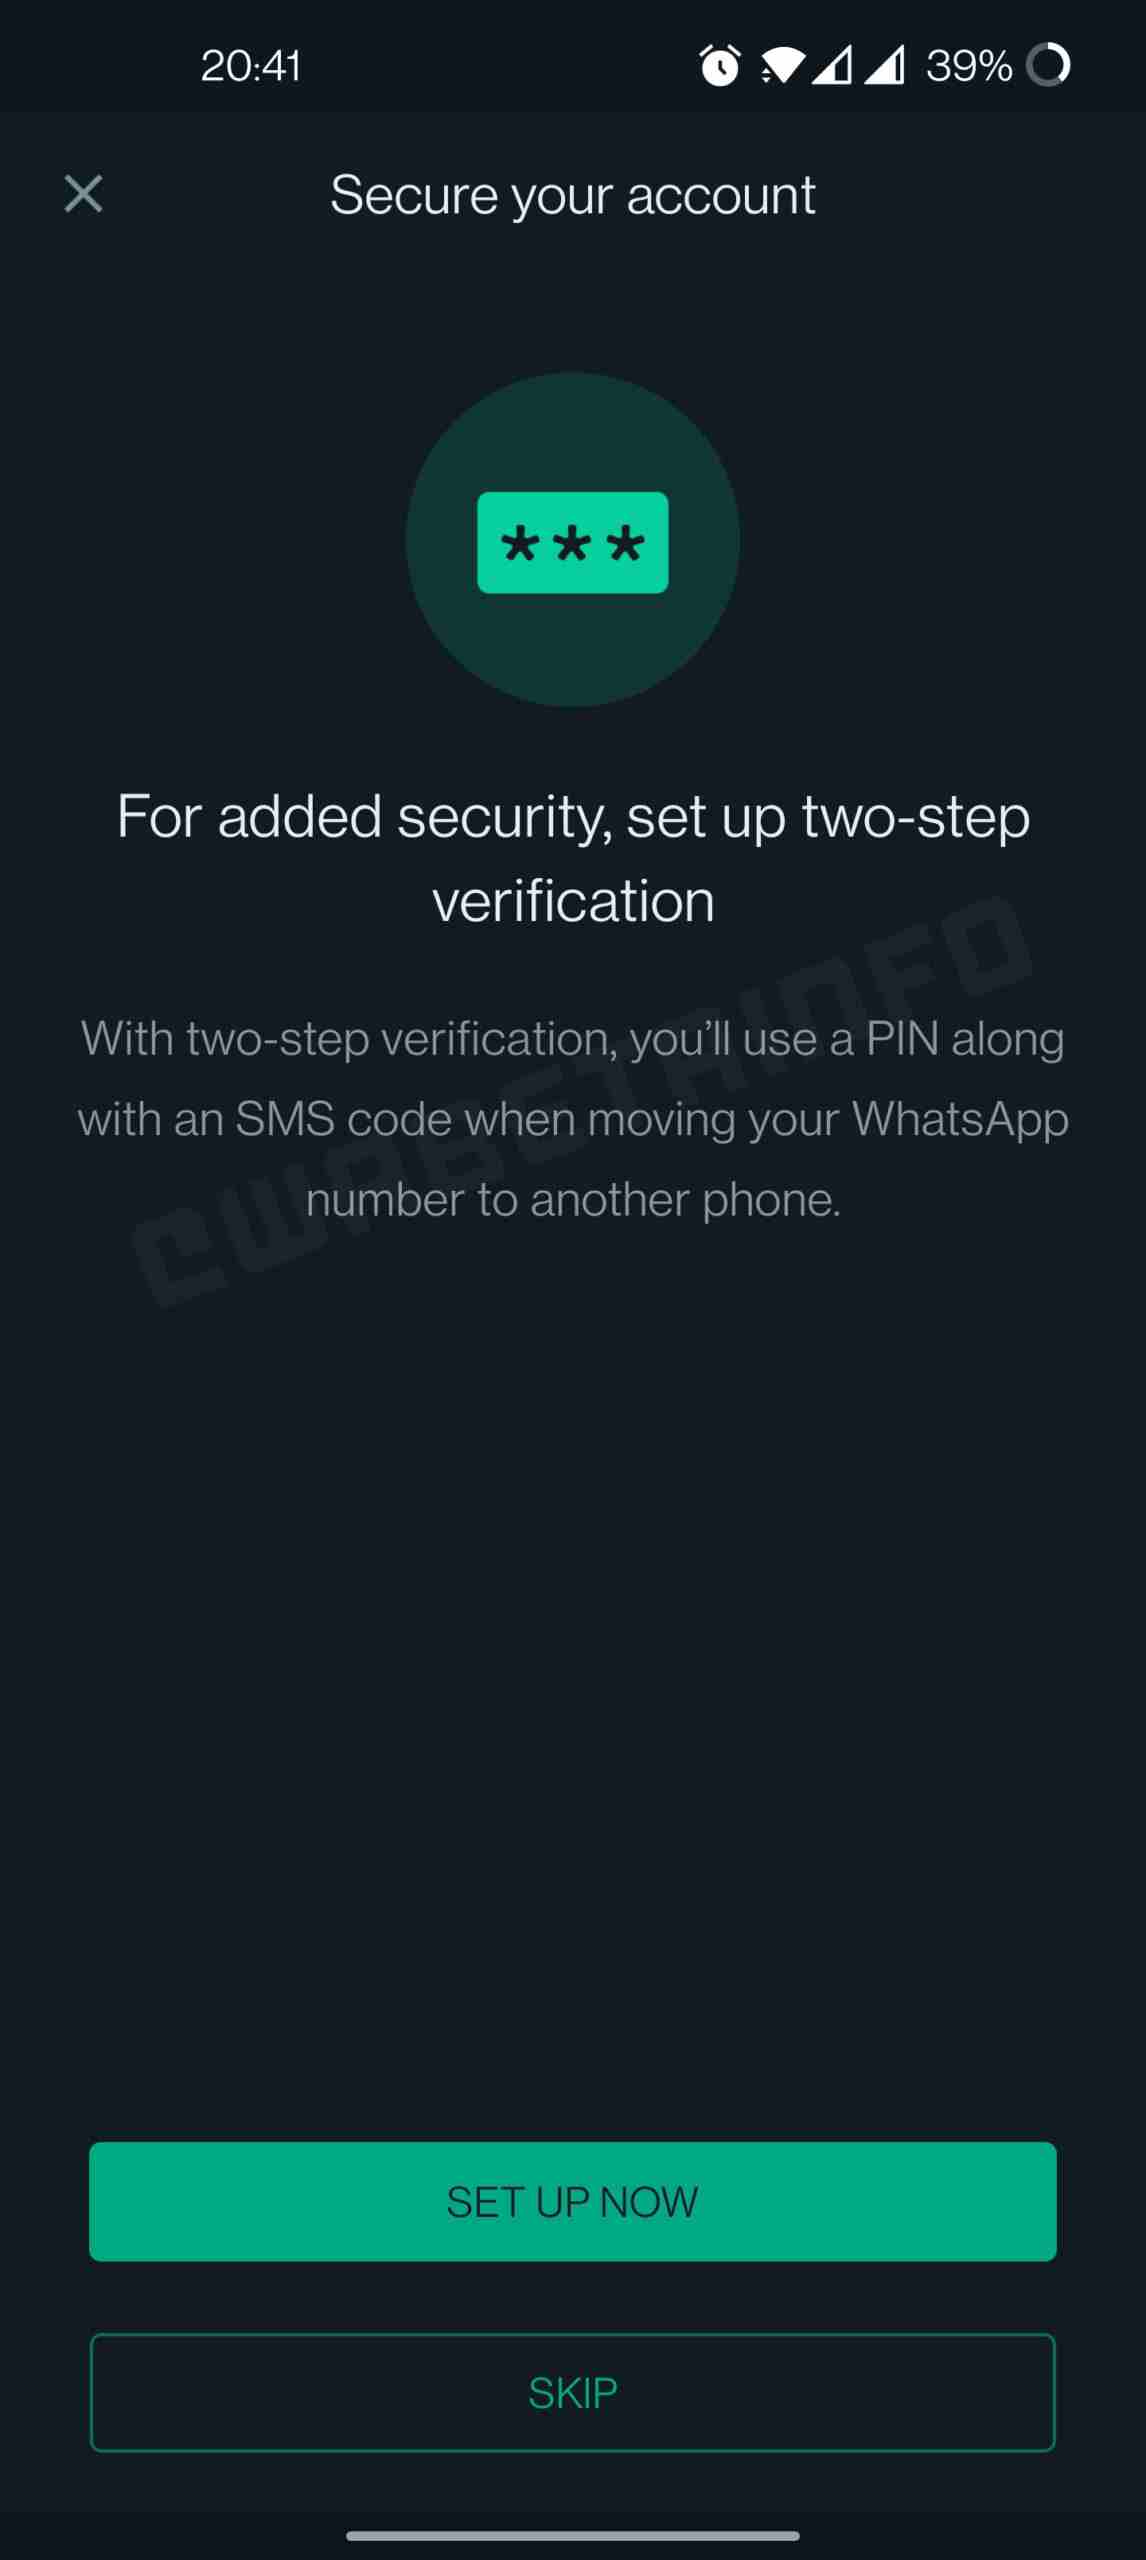 WhatsApp new Secure your Account section, Image Credit: WABetaInfo